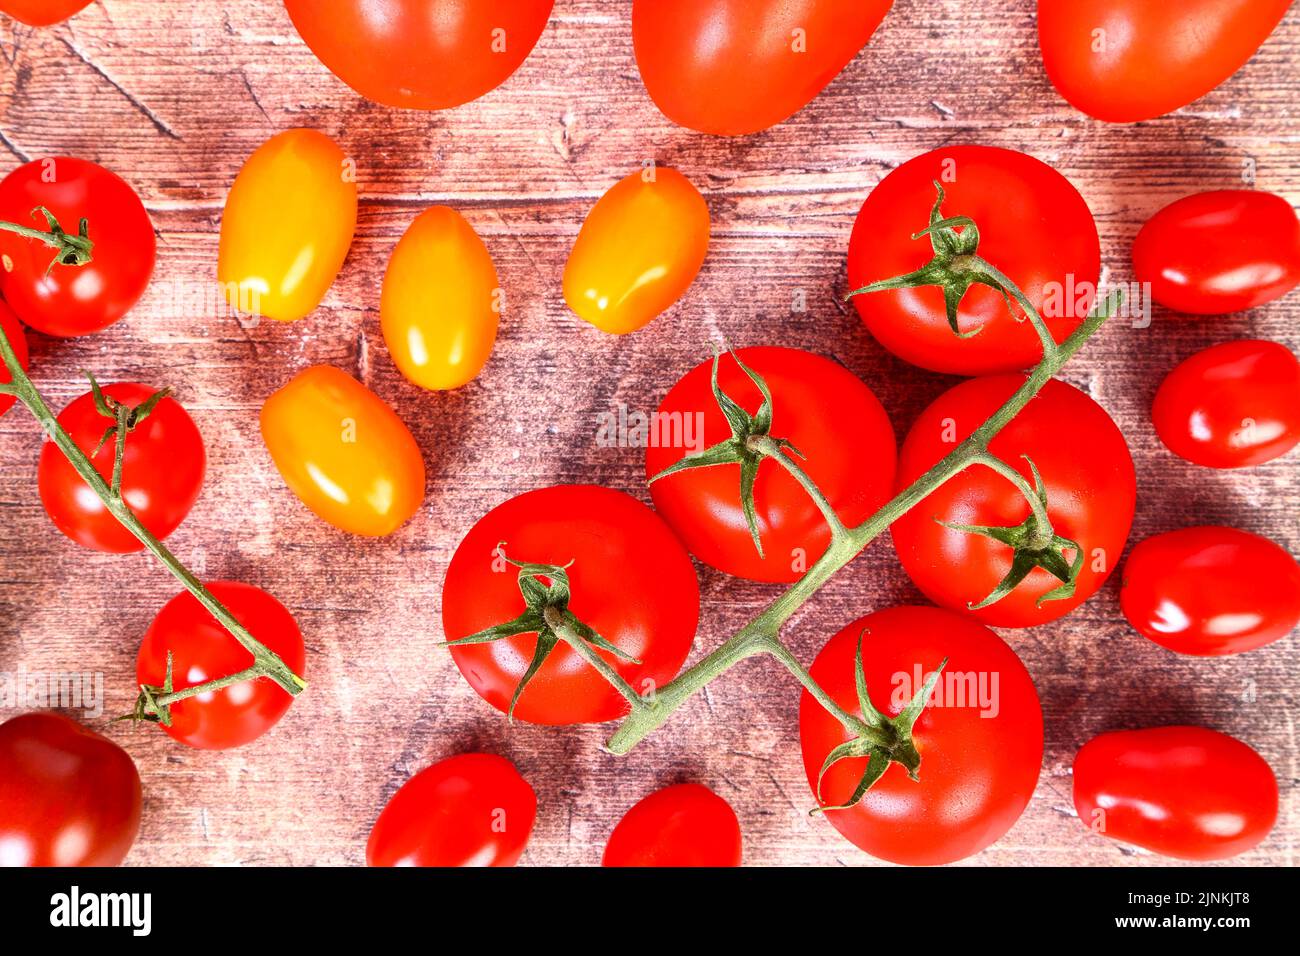 Flat lay view of a mixture of ripe tomatoes on a wooden table top Stock Photo